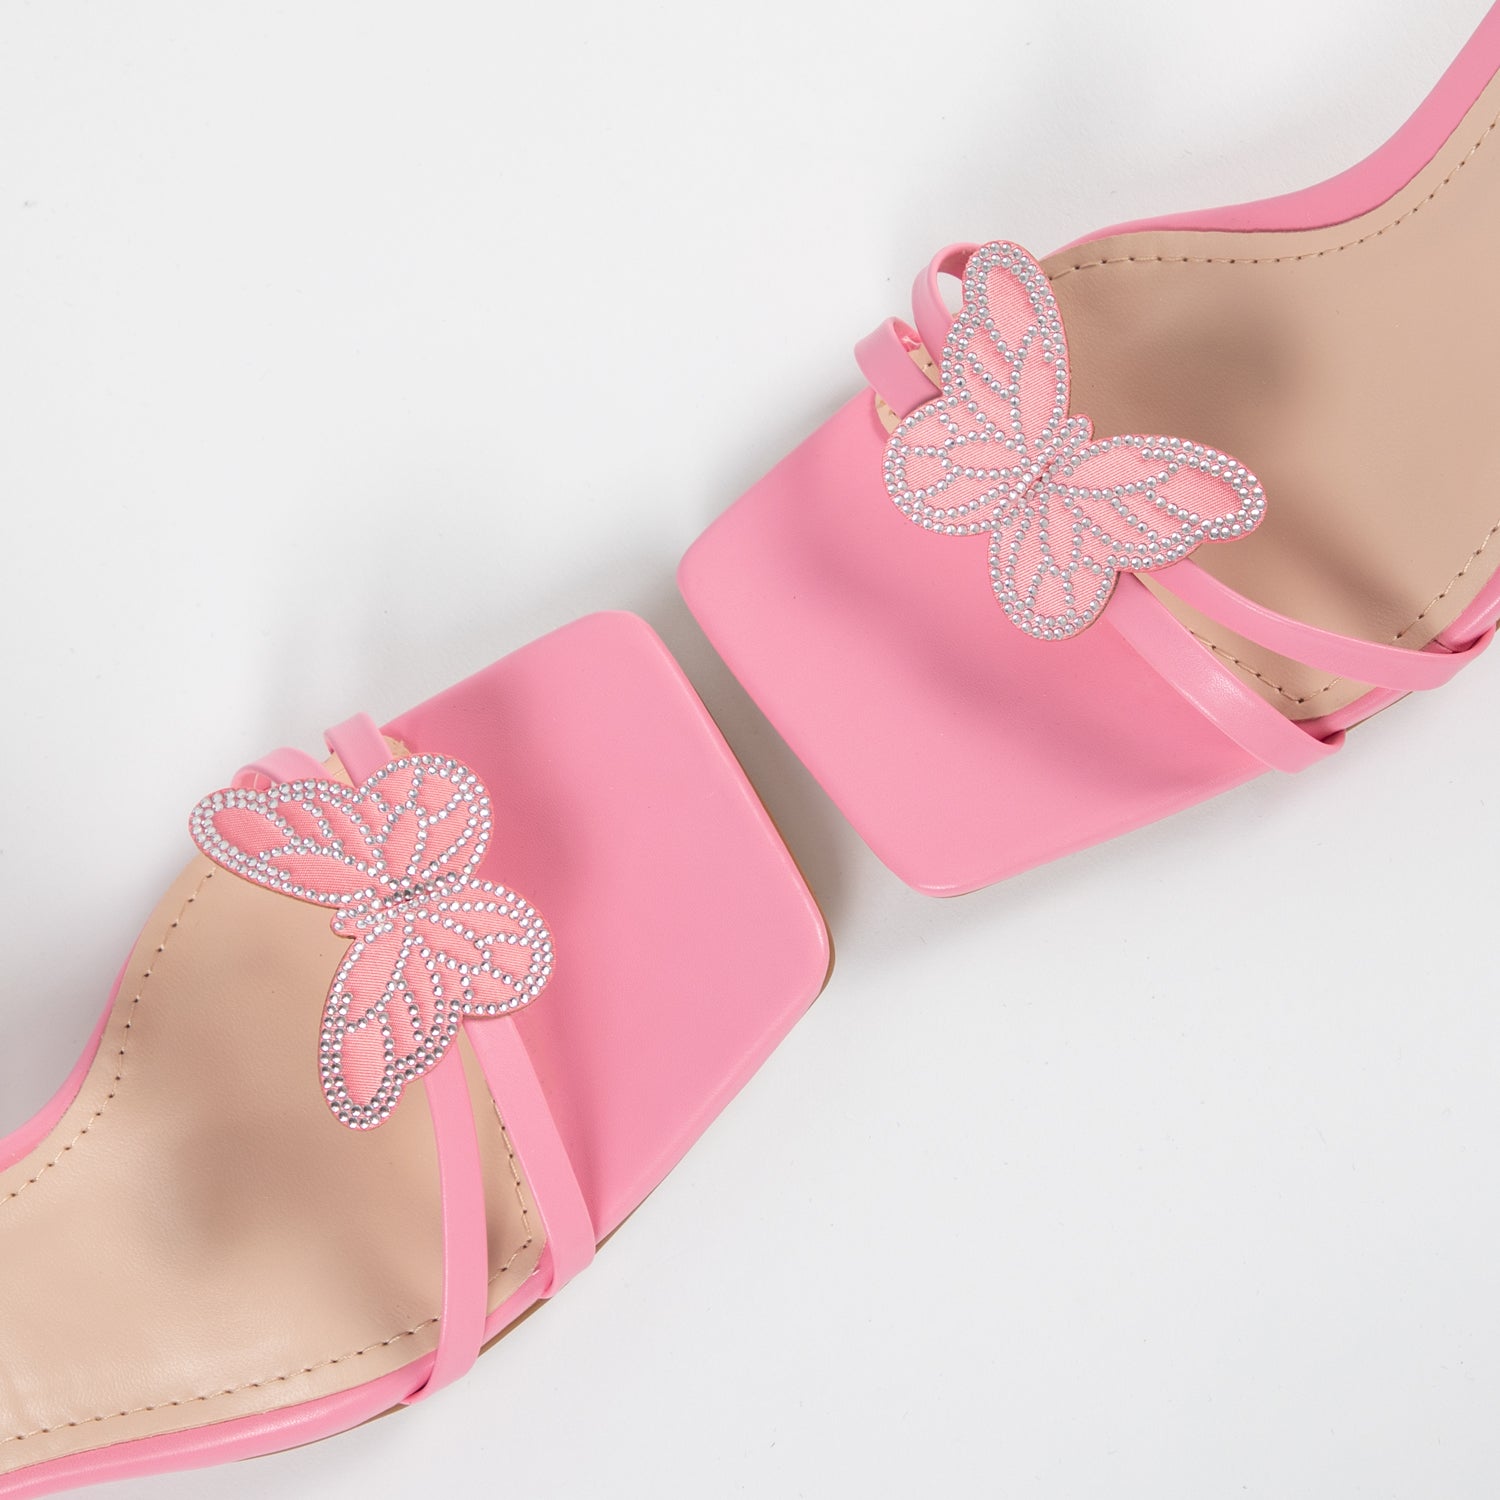 RAID Kinny Lace Up Heel in Baby Pink